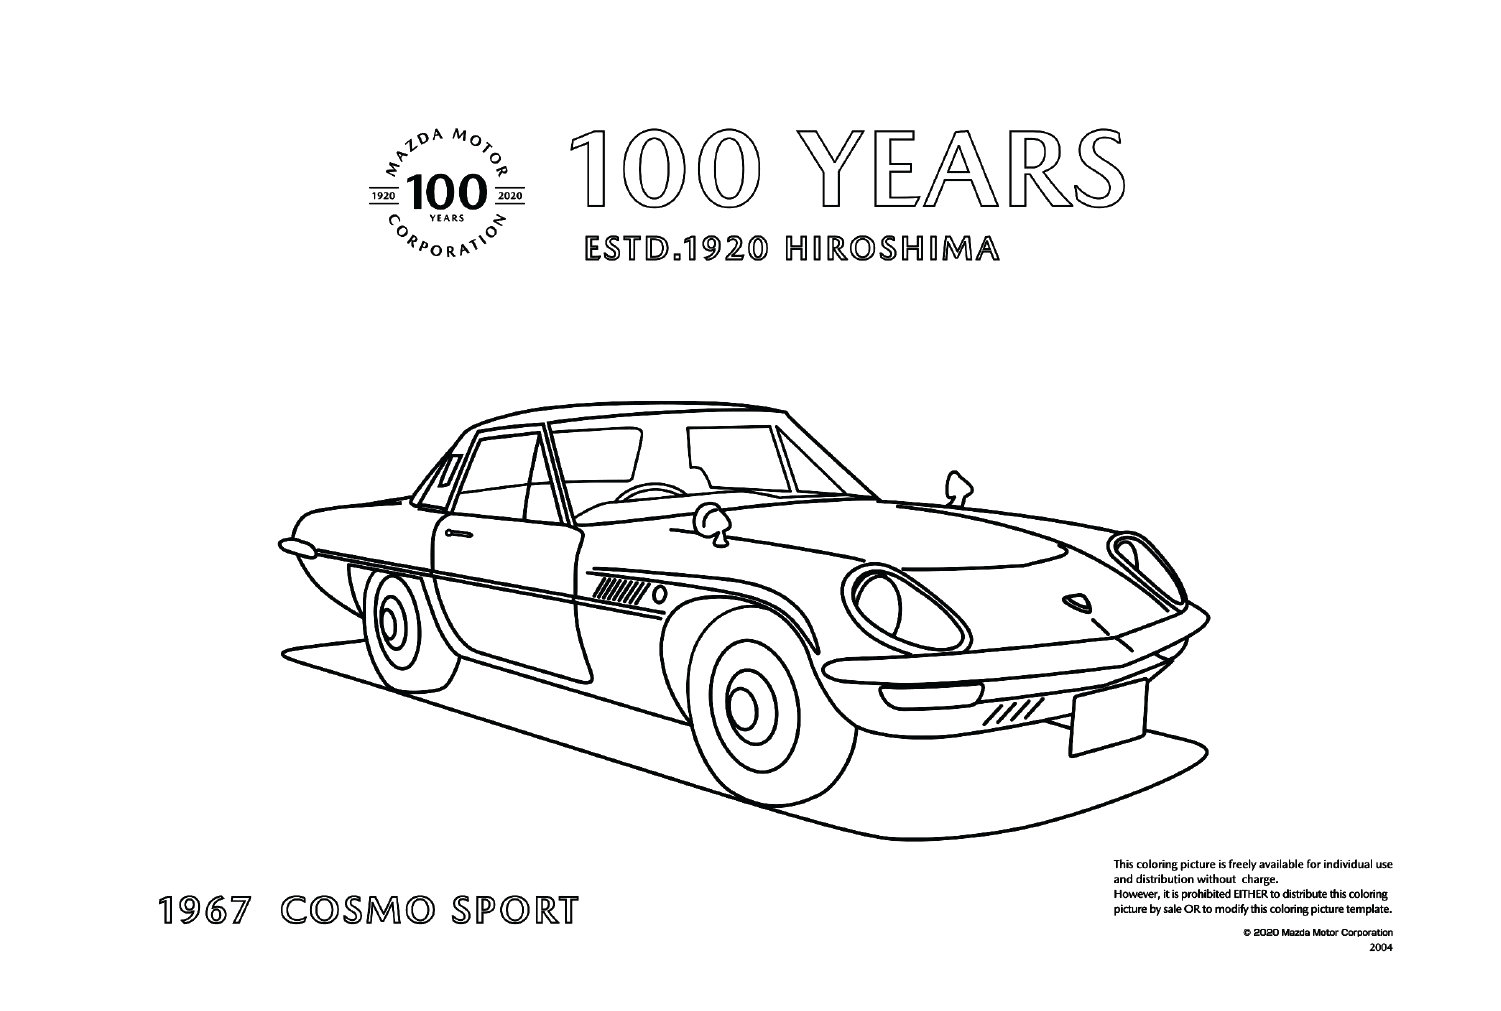 Mazda Cosmo Sport Color Page from Mazda